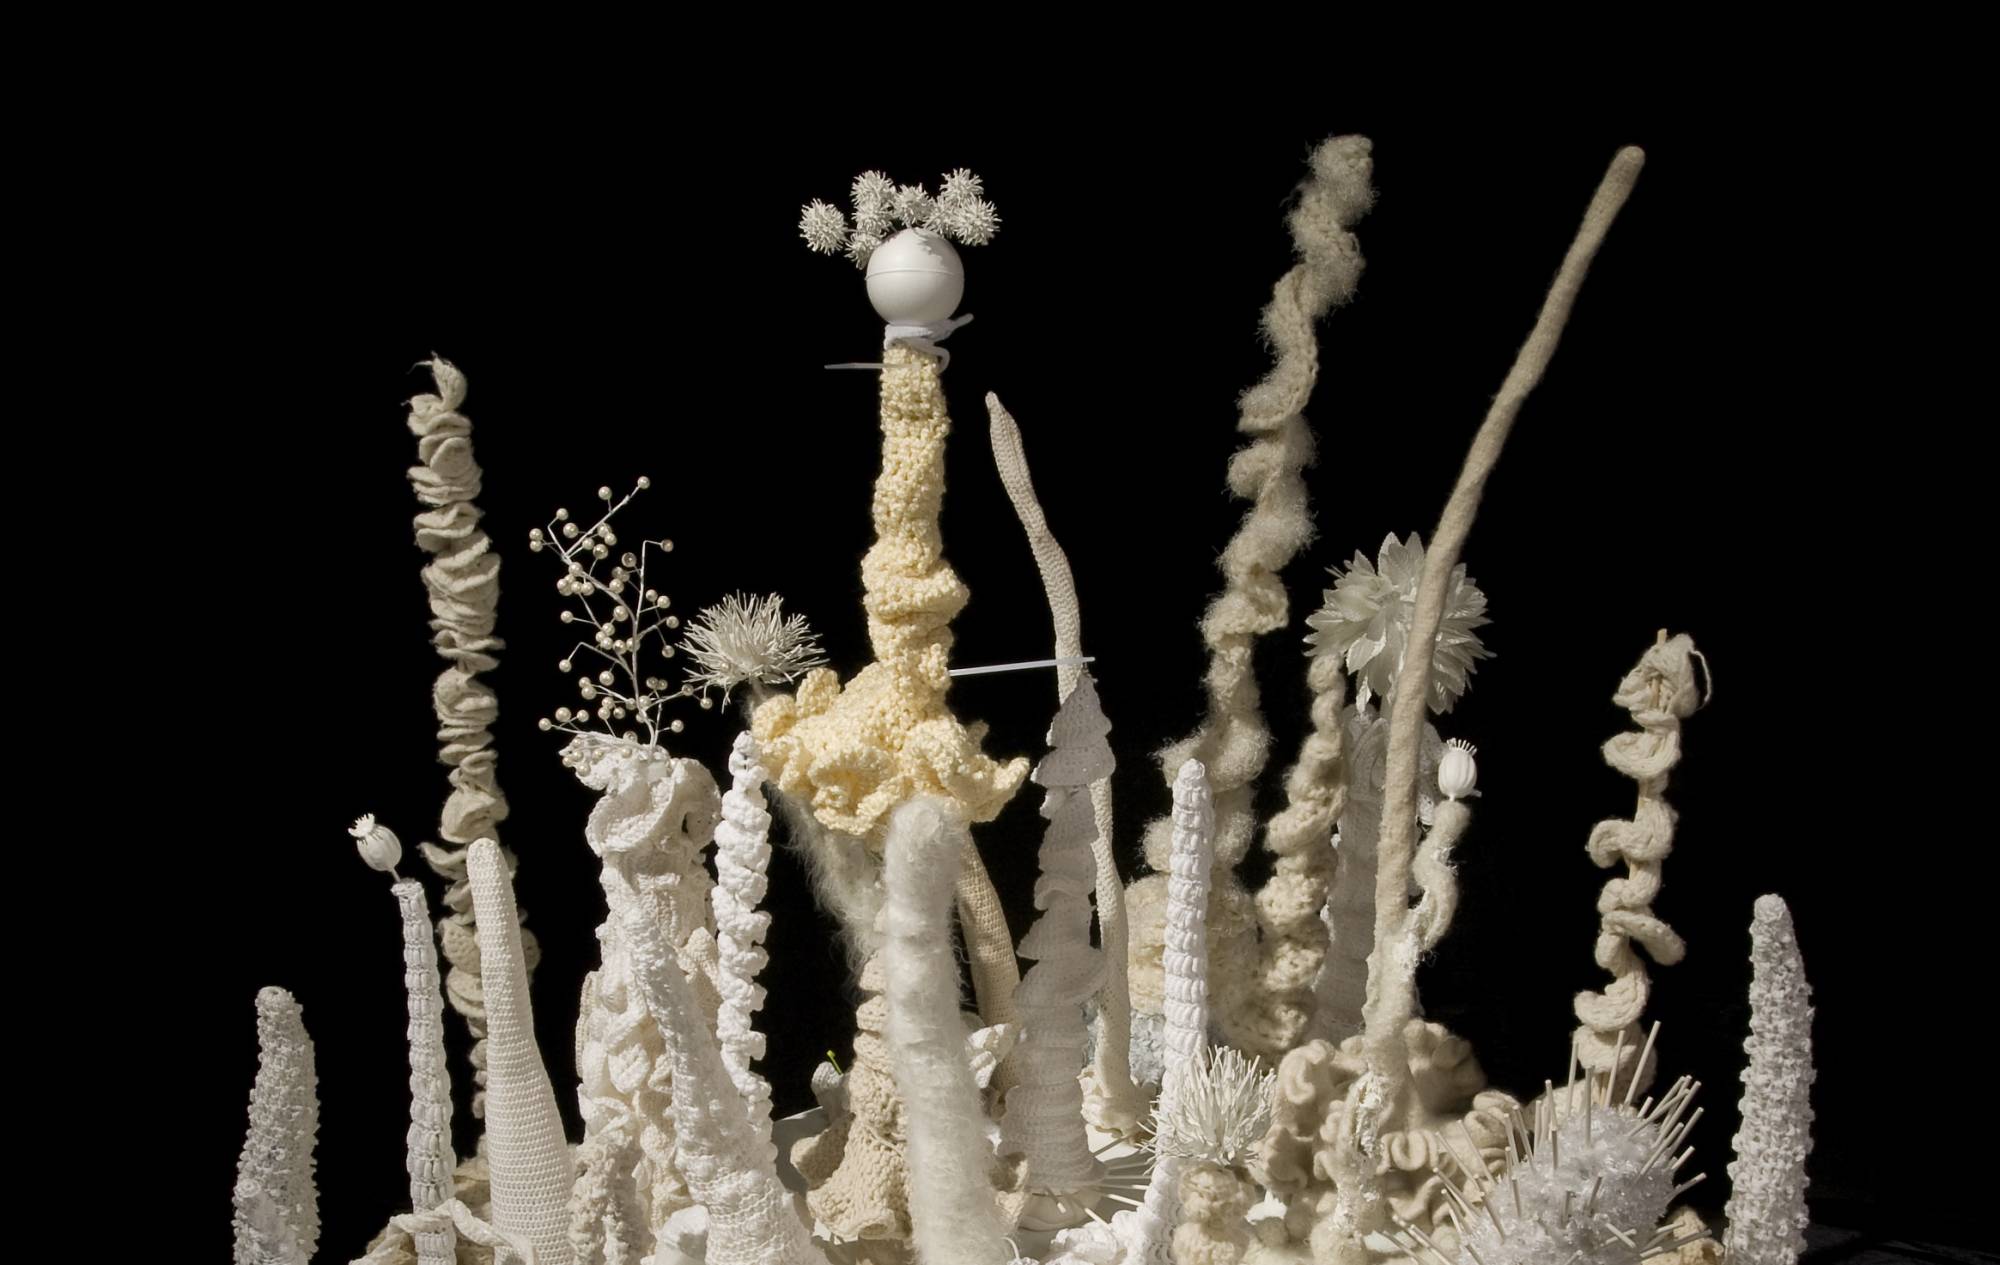 Spindly white reef scultures